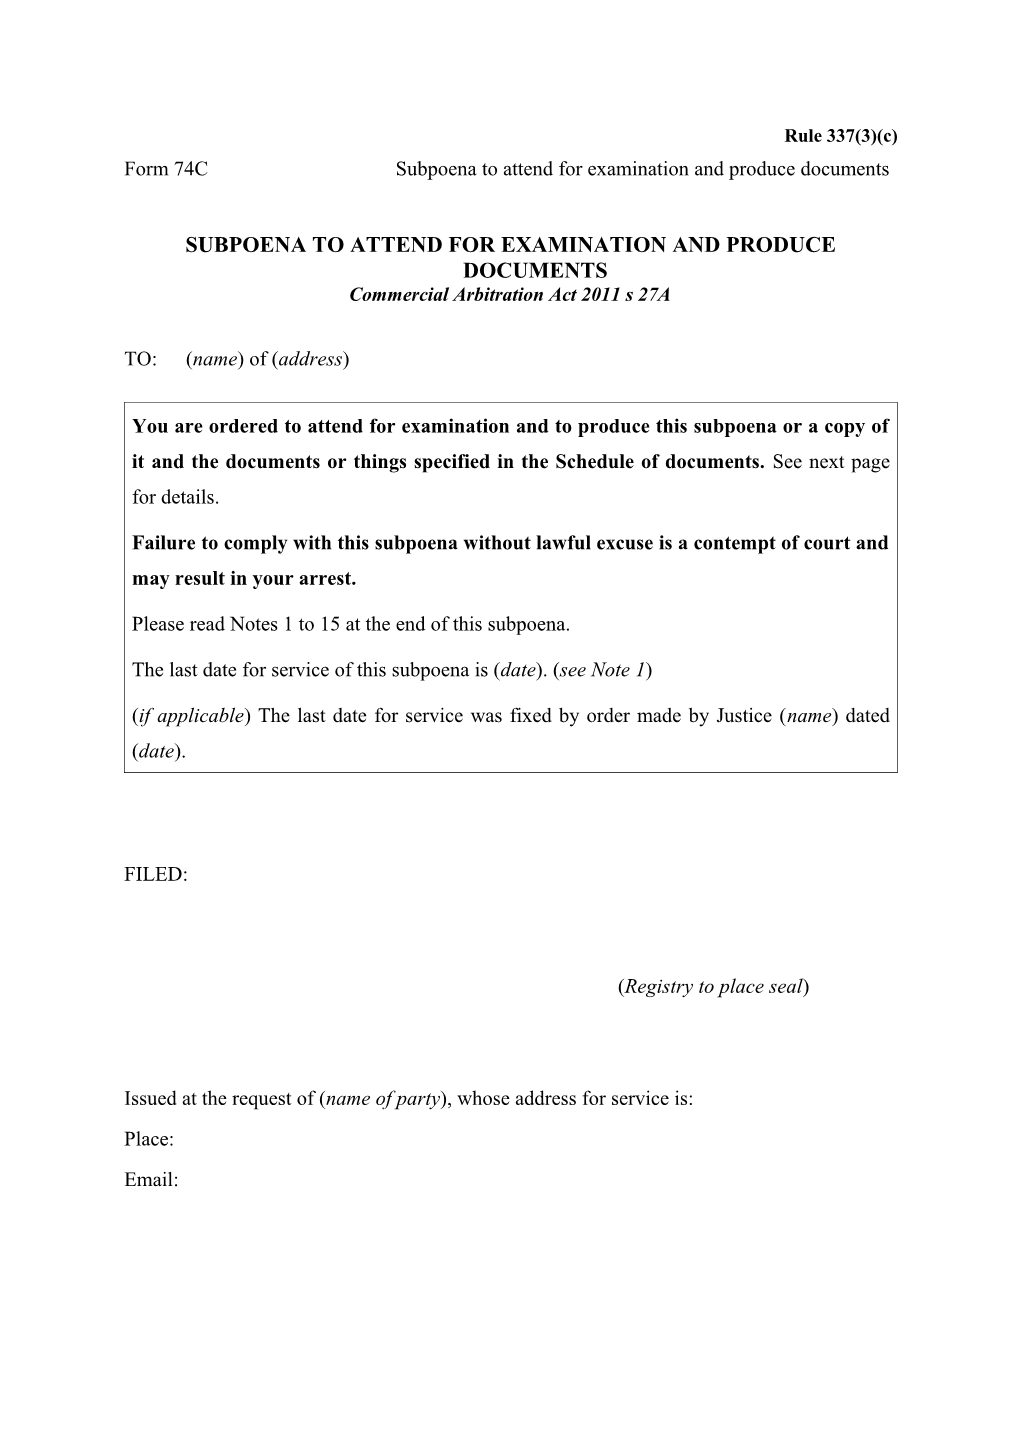 Form 74C - Subpoena to Attend for Examination and Produce Documents